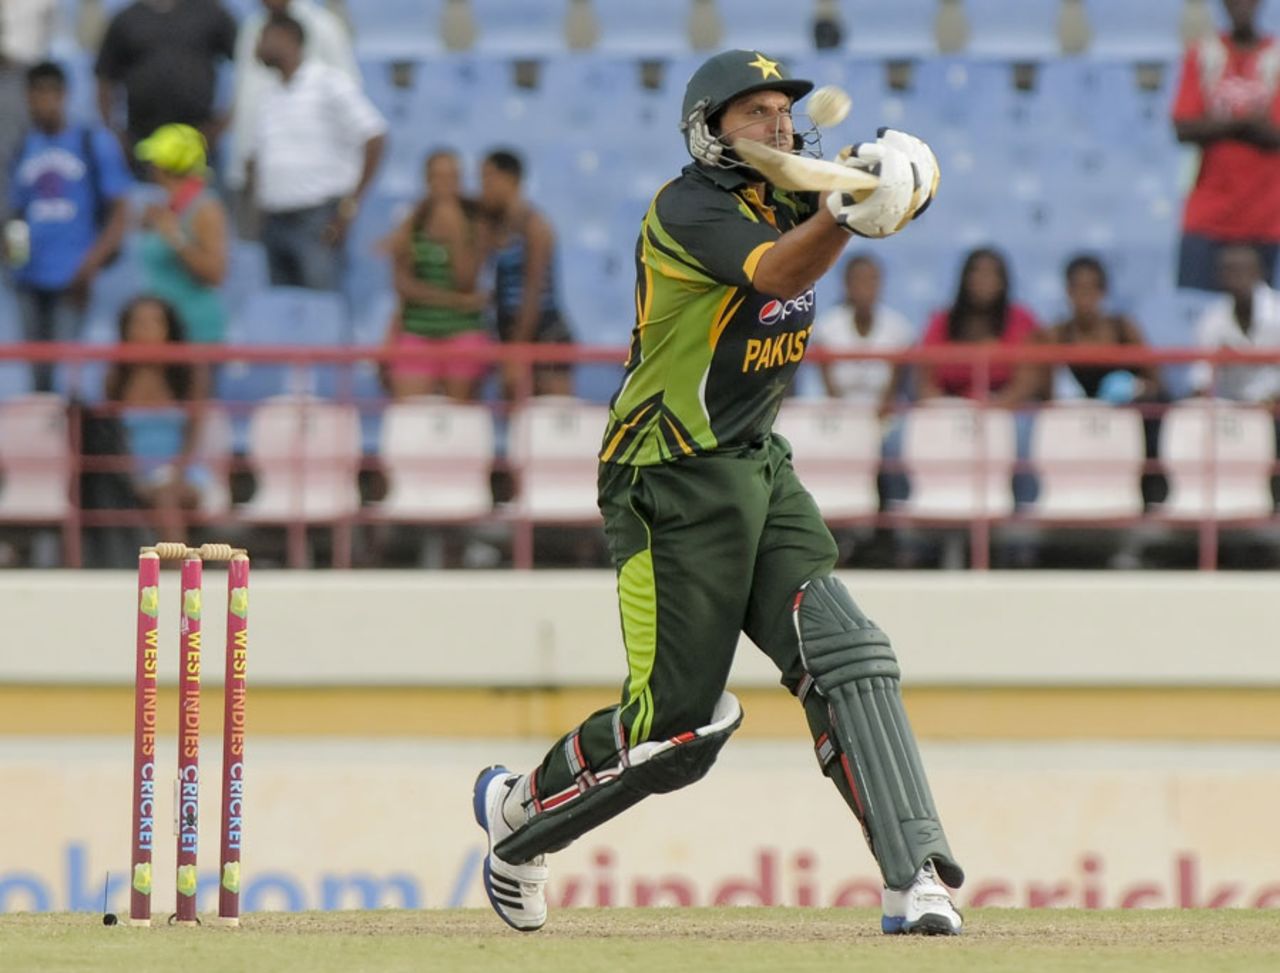 Shahid Afridi gets under the ball to play a hook shot, West Indies v Pakistan, 5th ODI, St Lucia, July 24, 2013